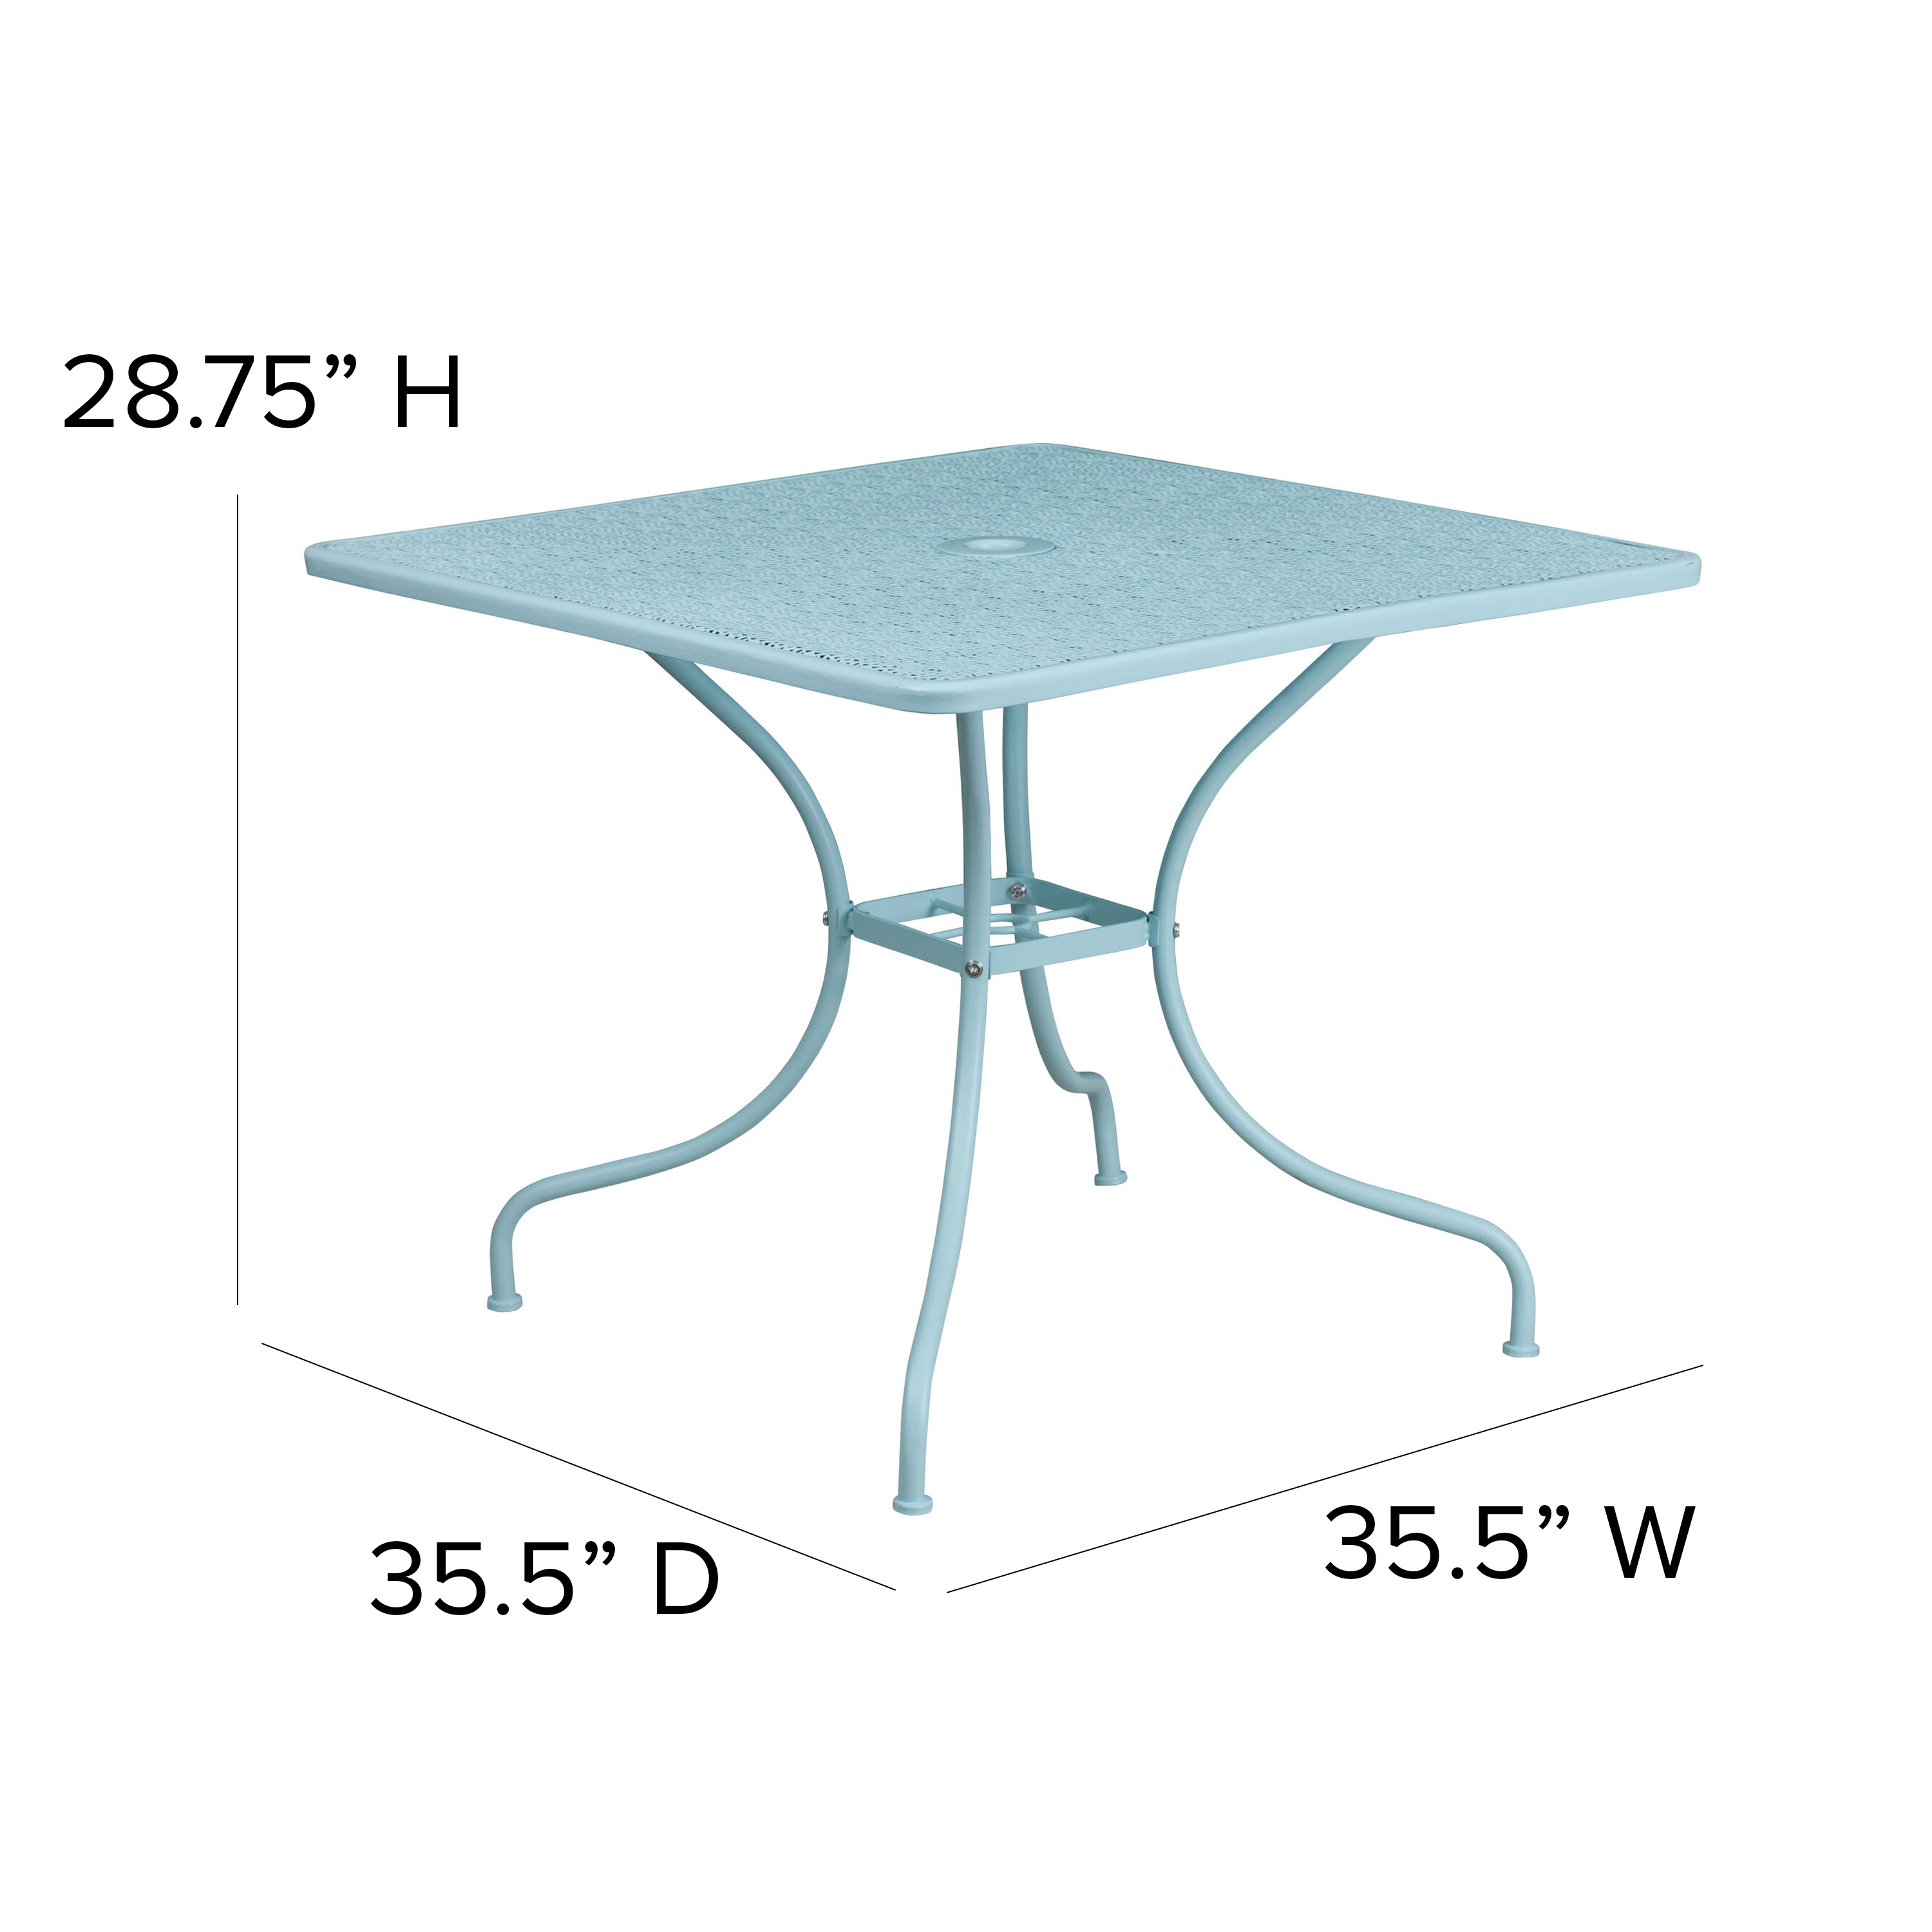 Flash Furniture Commercial Grade 35.5" Square Sky Blue Indoor-Outdoor Steel Patio Table with Umbrella Hole - image 5 of 8